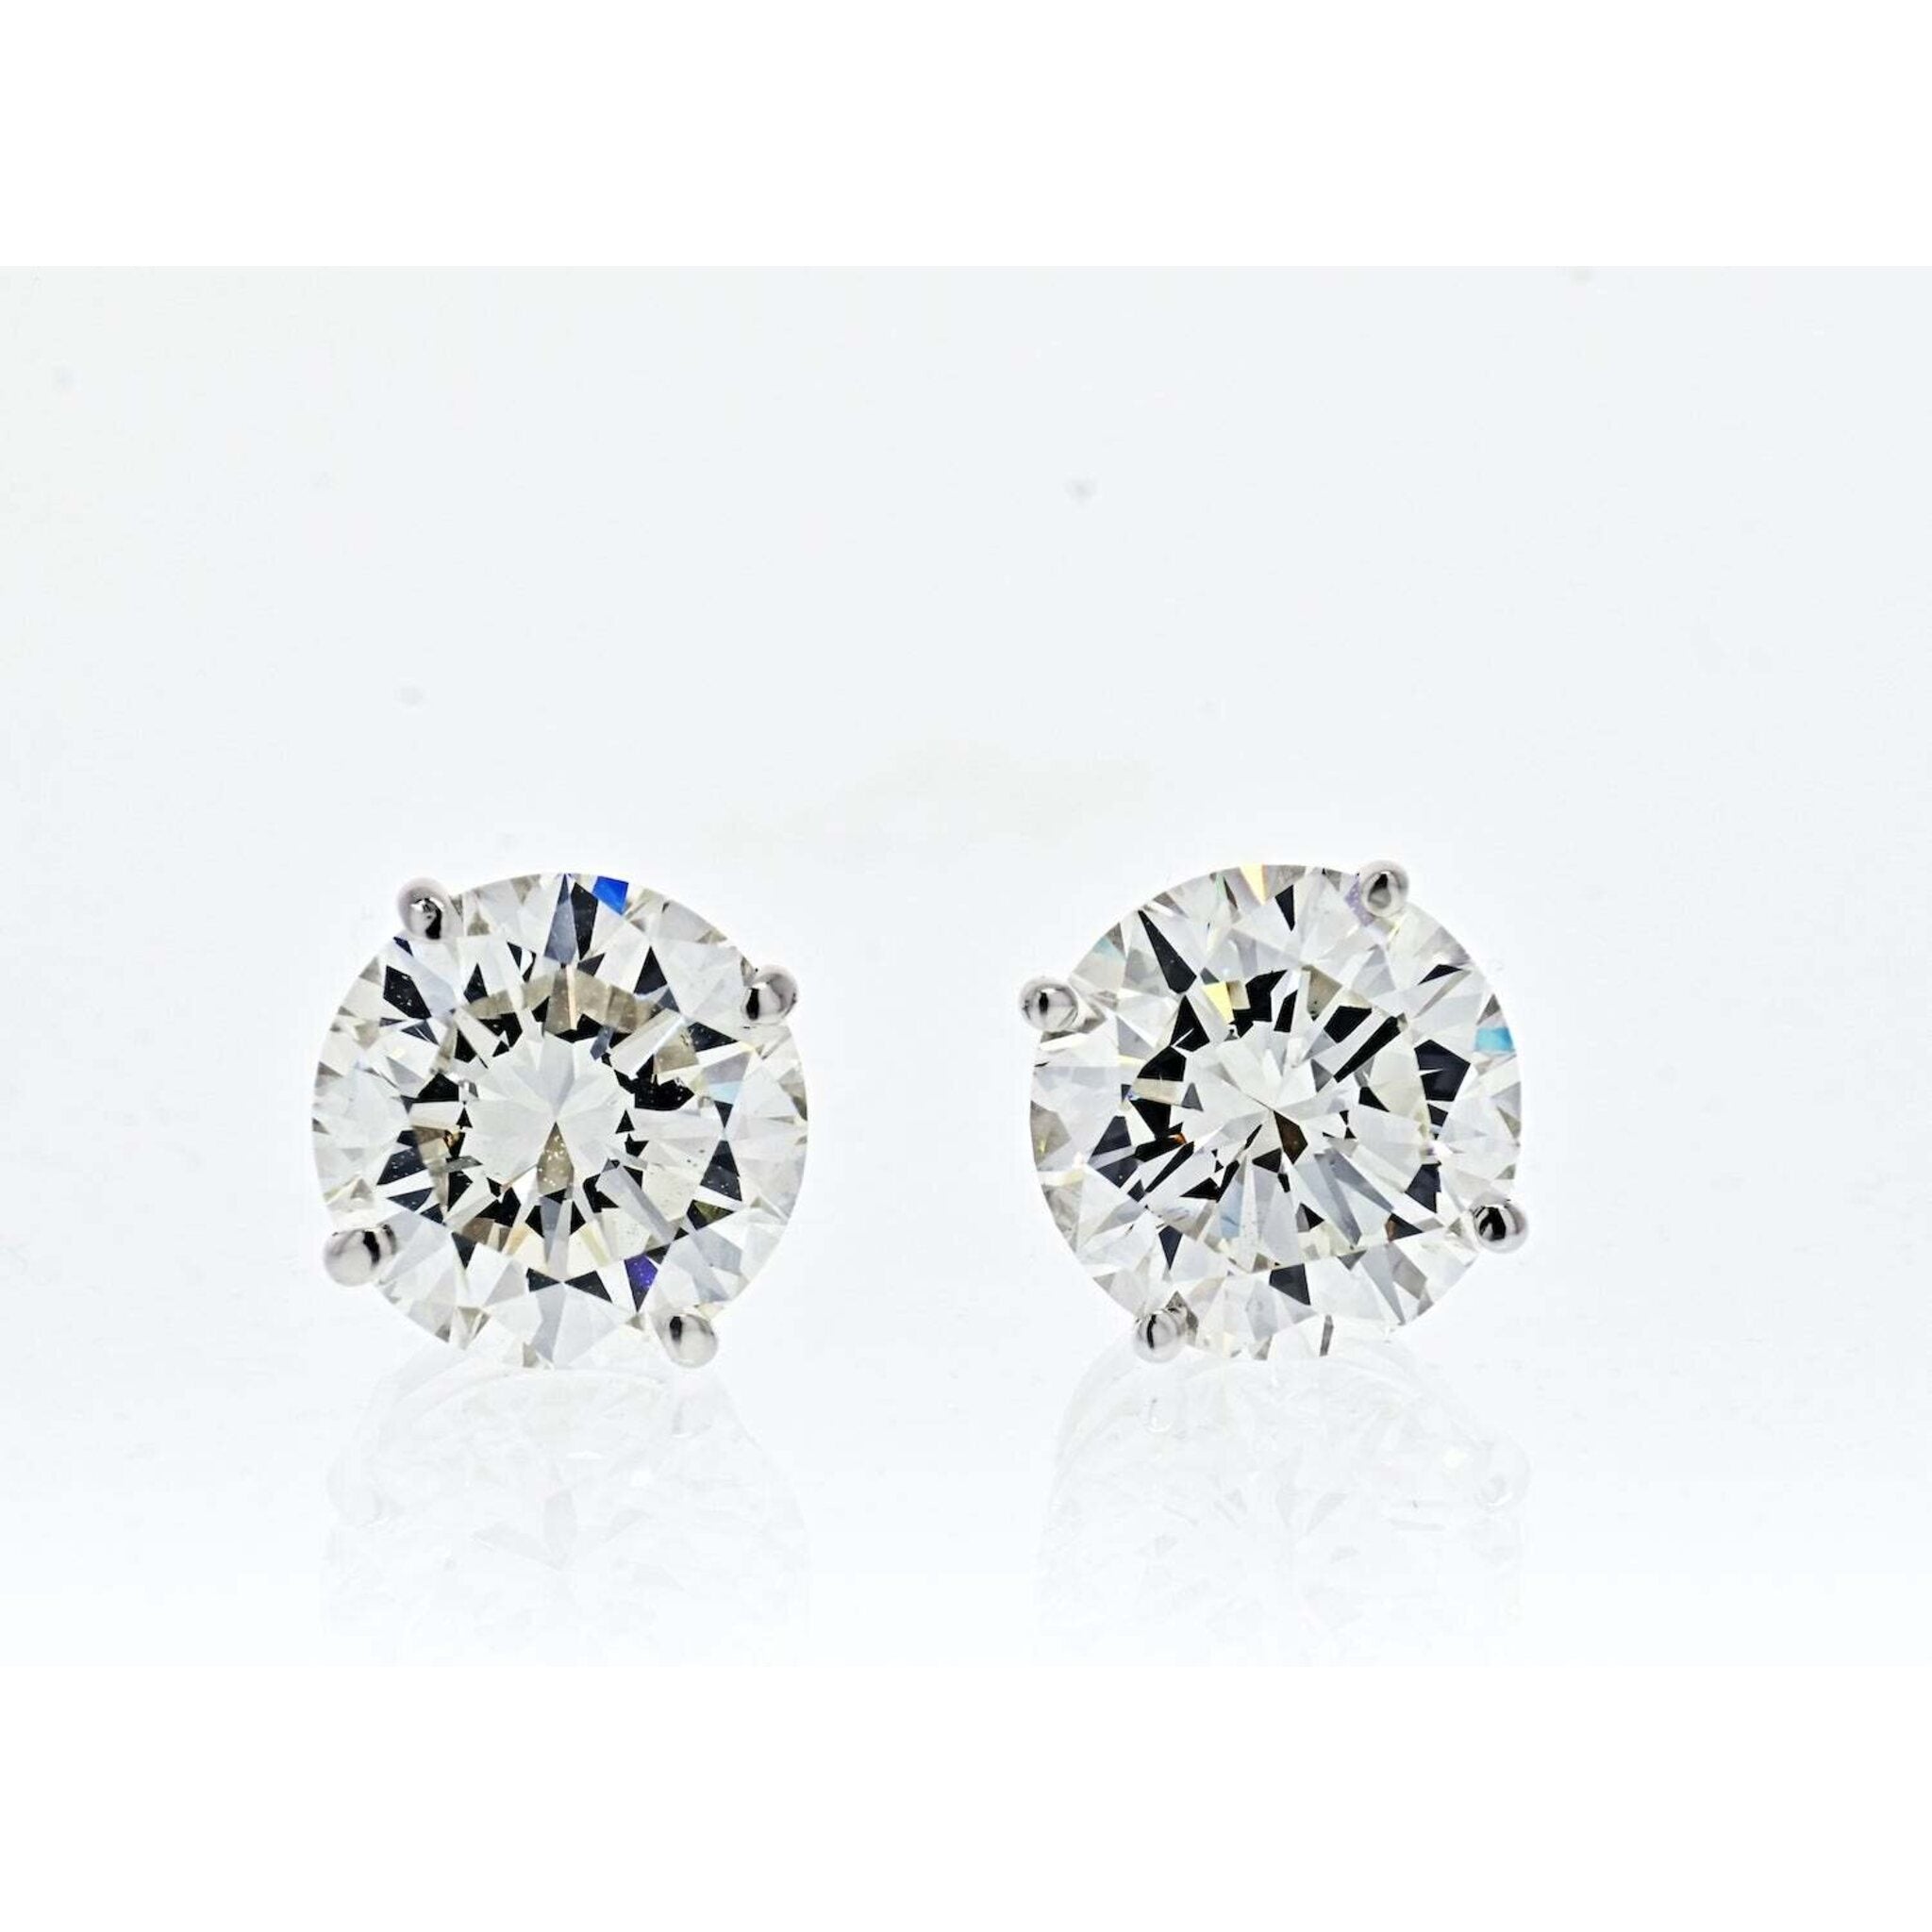 4.07 Carat Total Weight Round Diamond Stud Earrings (F-G, SI2, GIA)